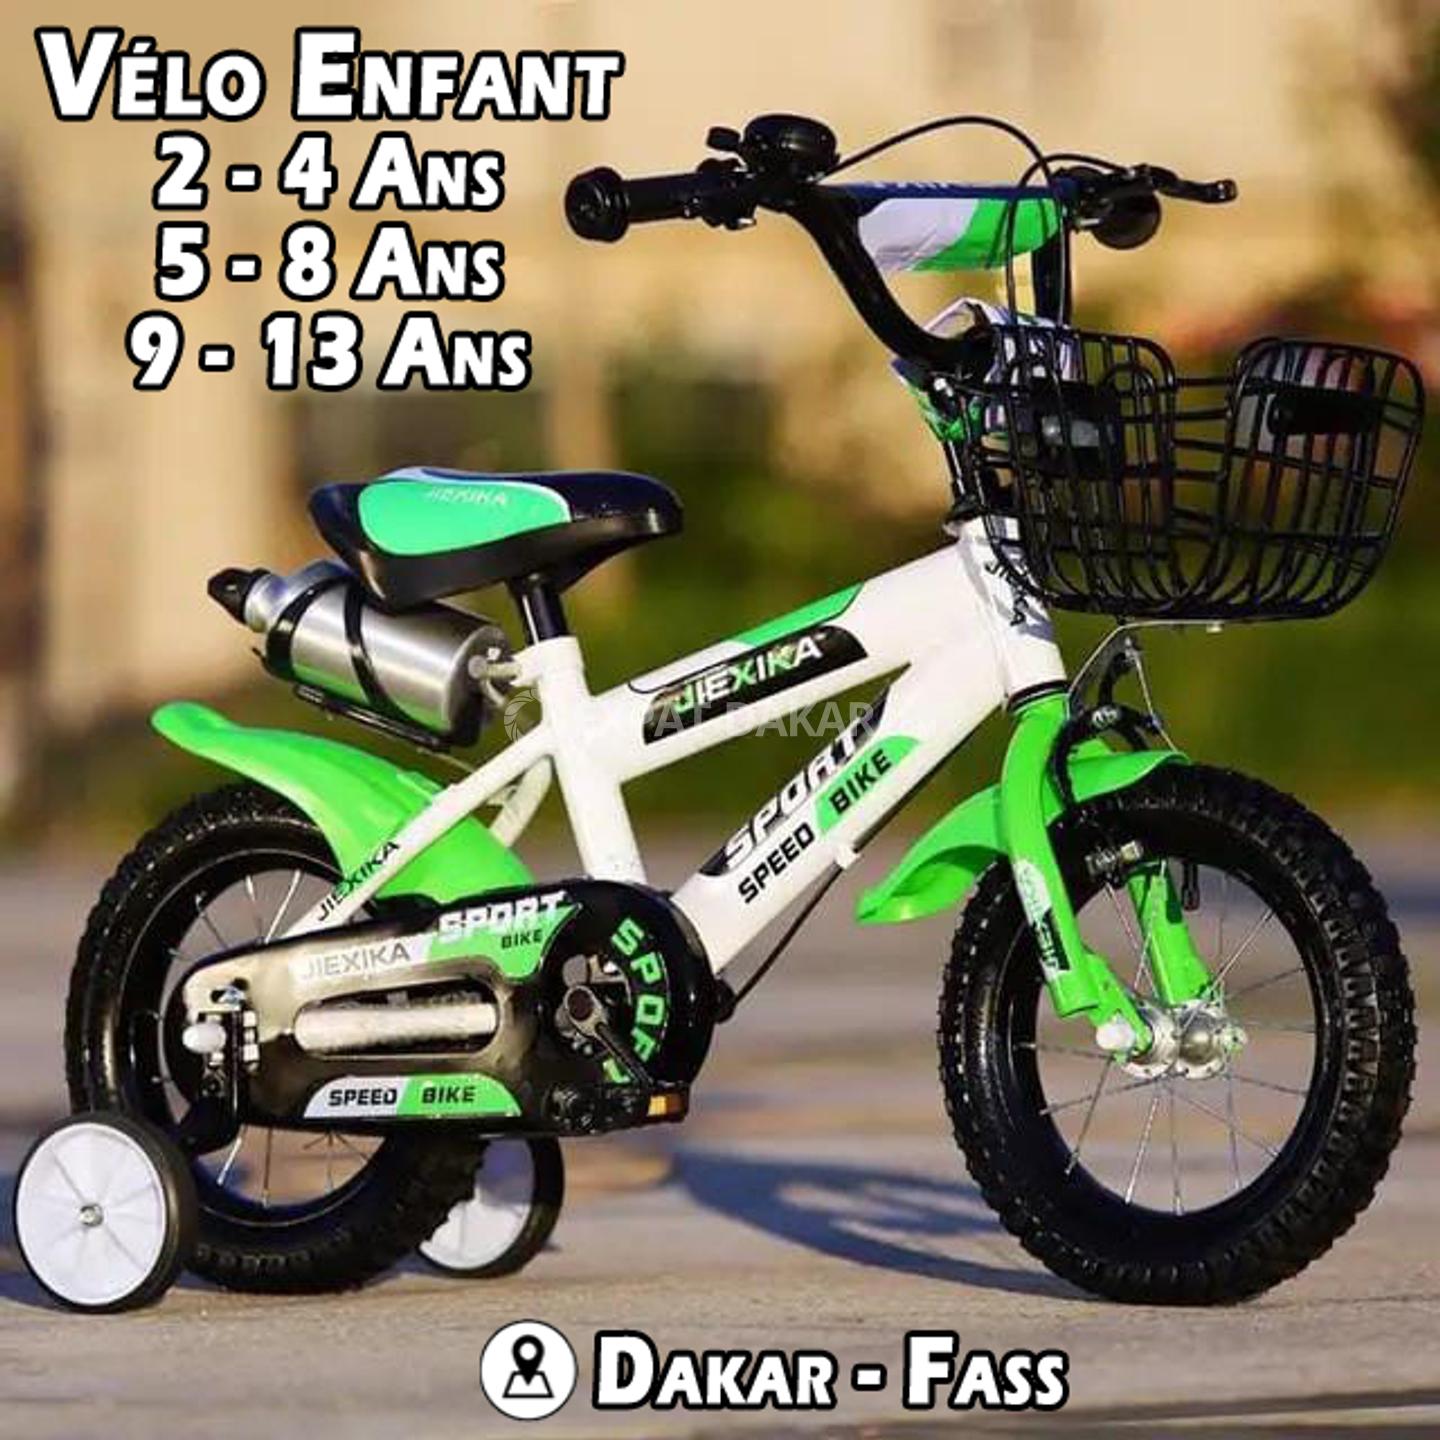 ACCESSOIRES VELO - Fass